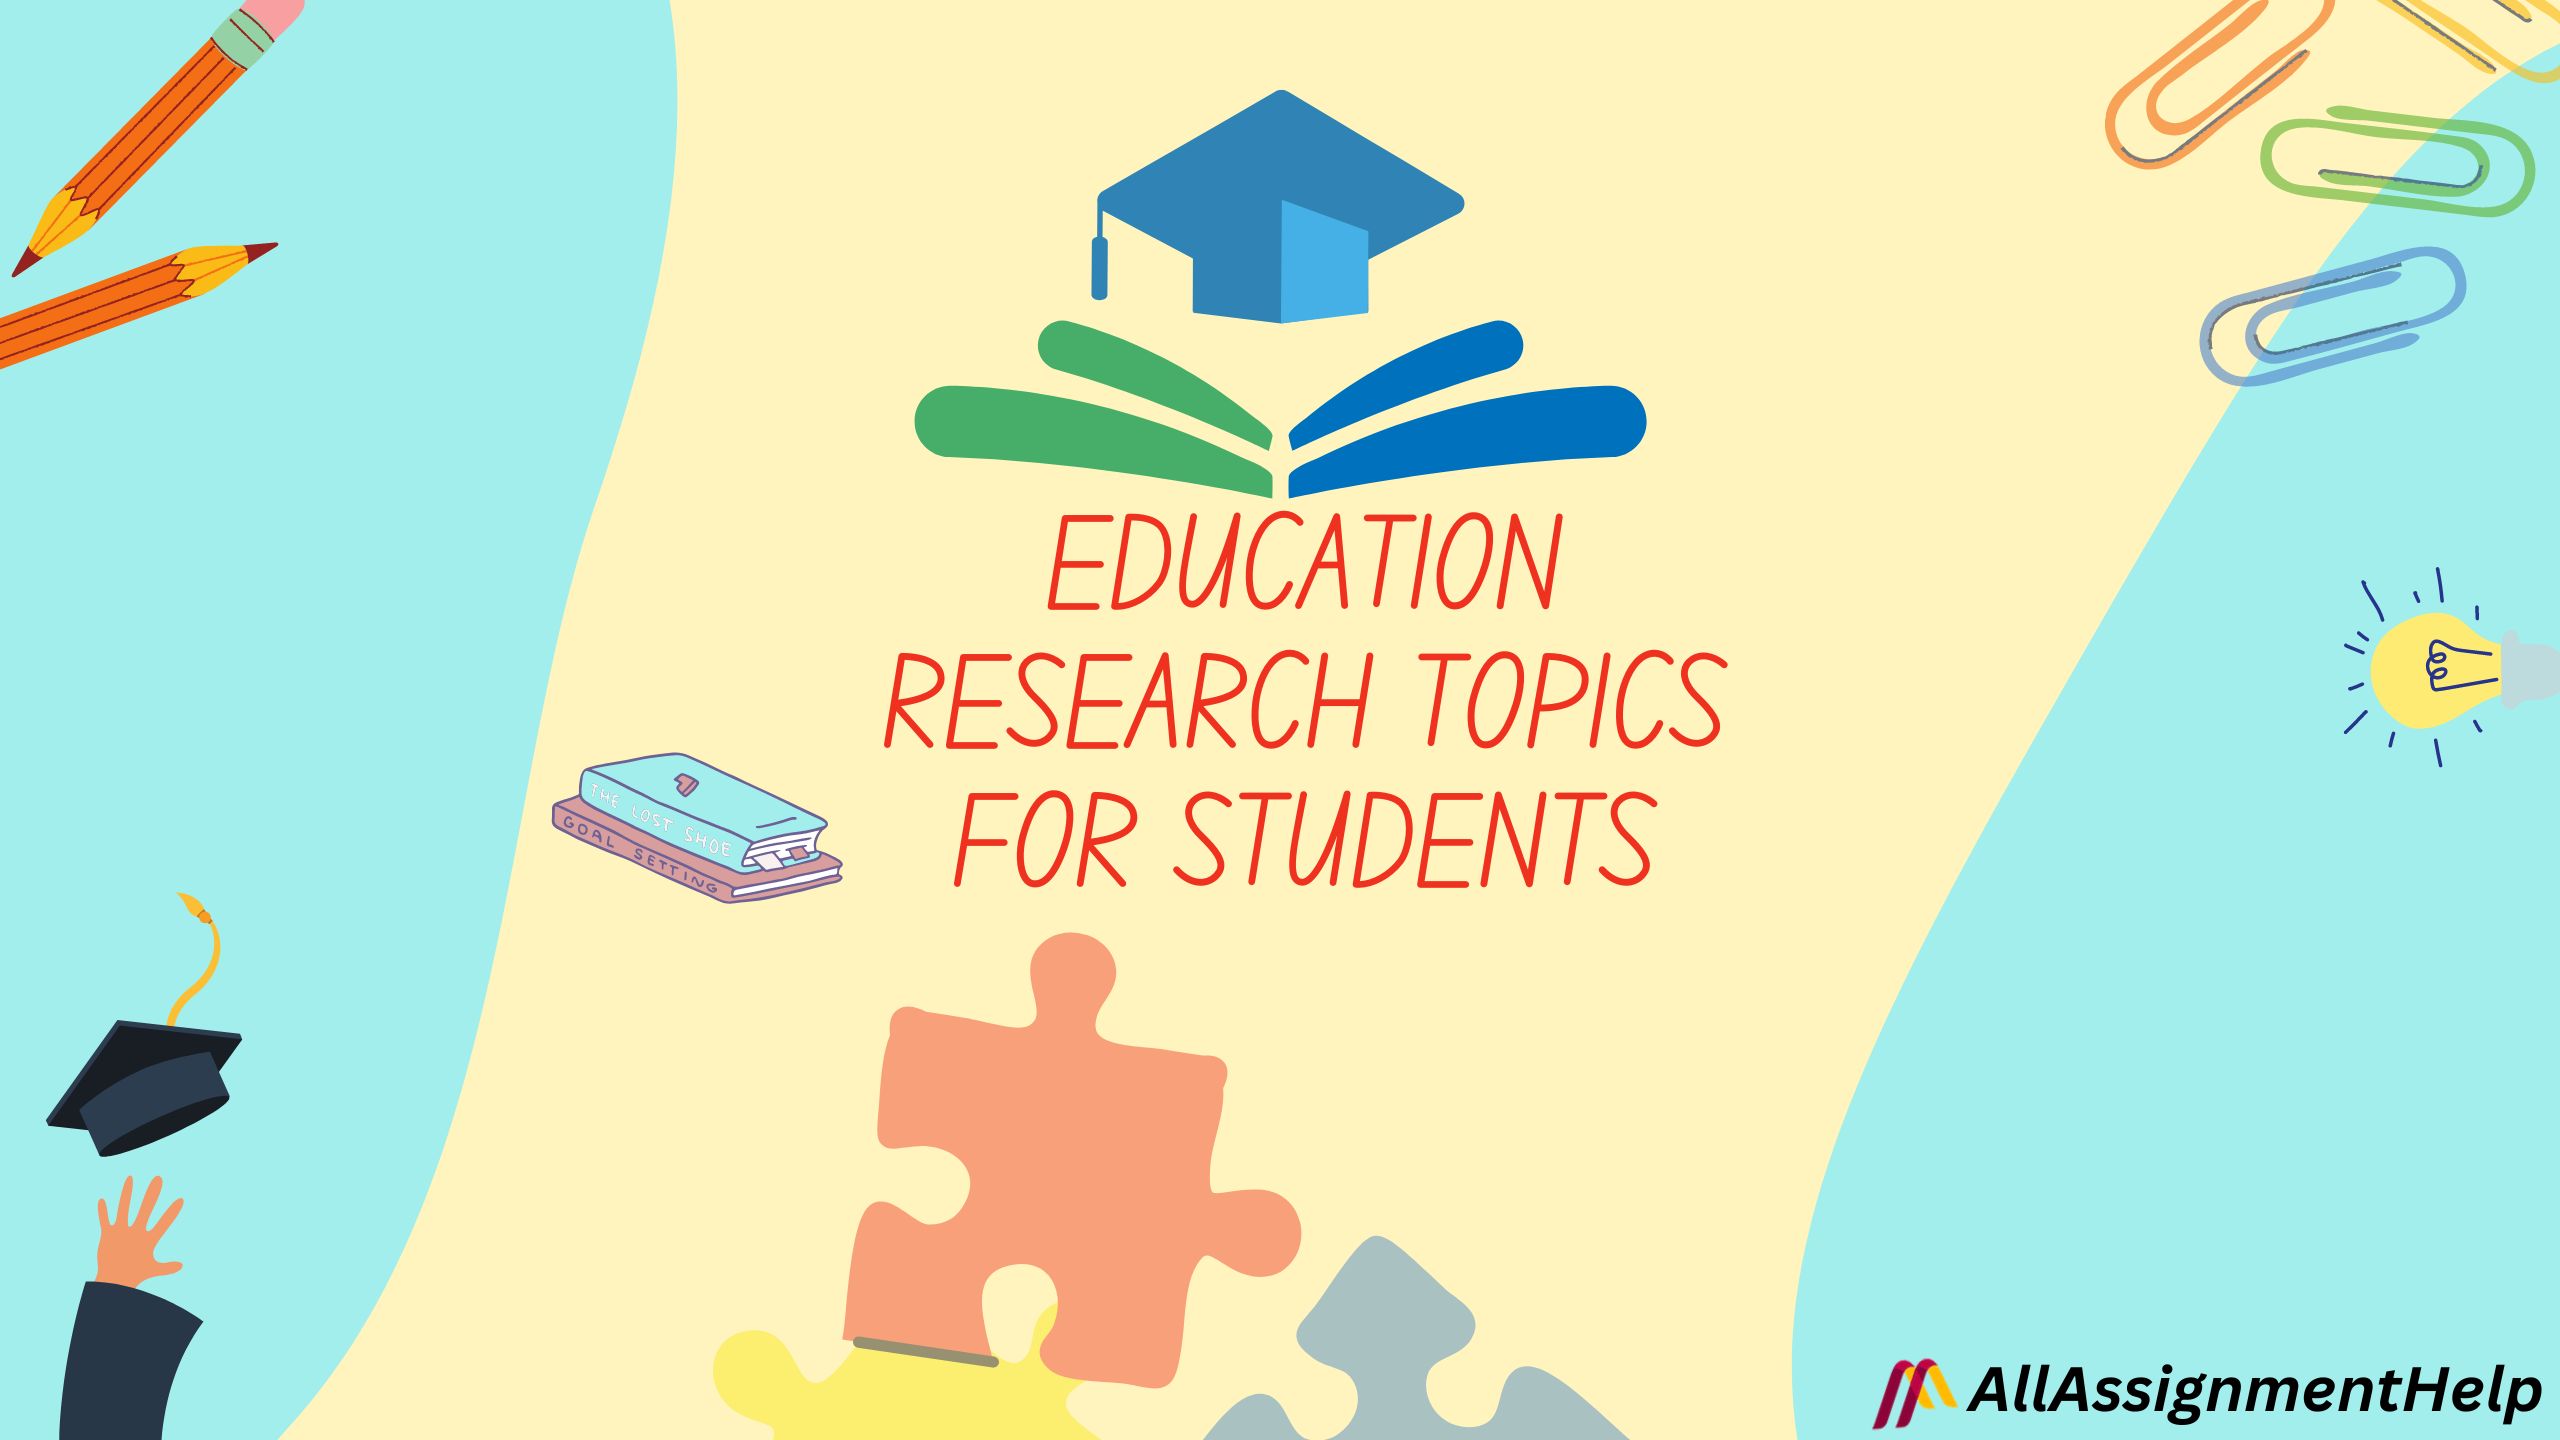 topic for research about students